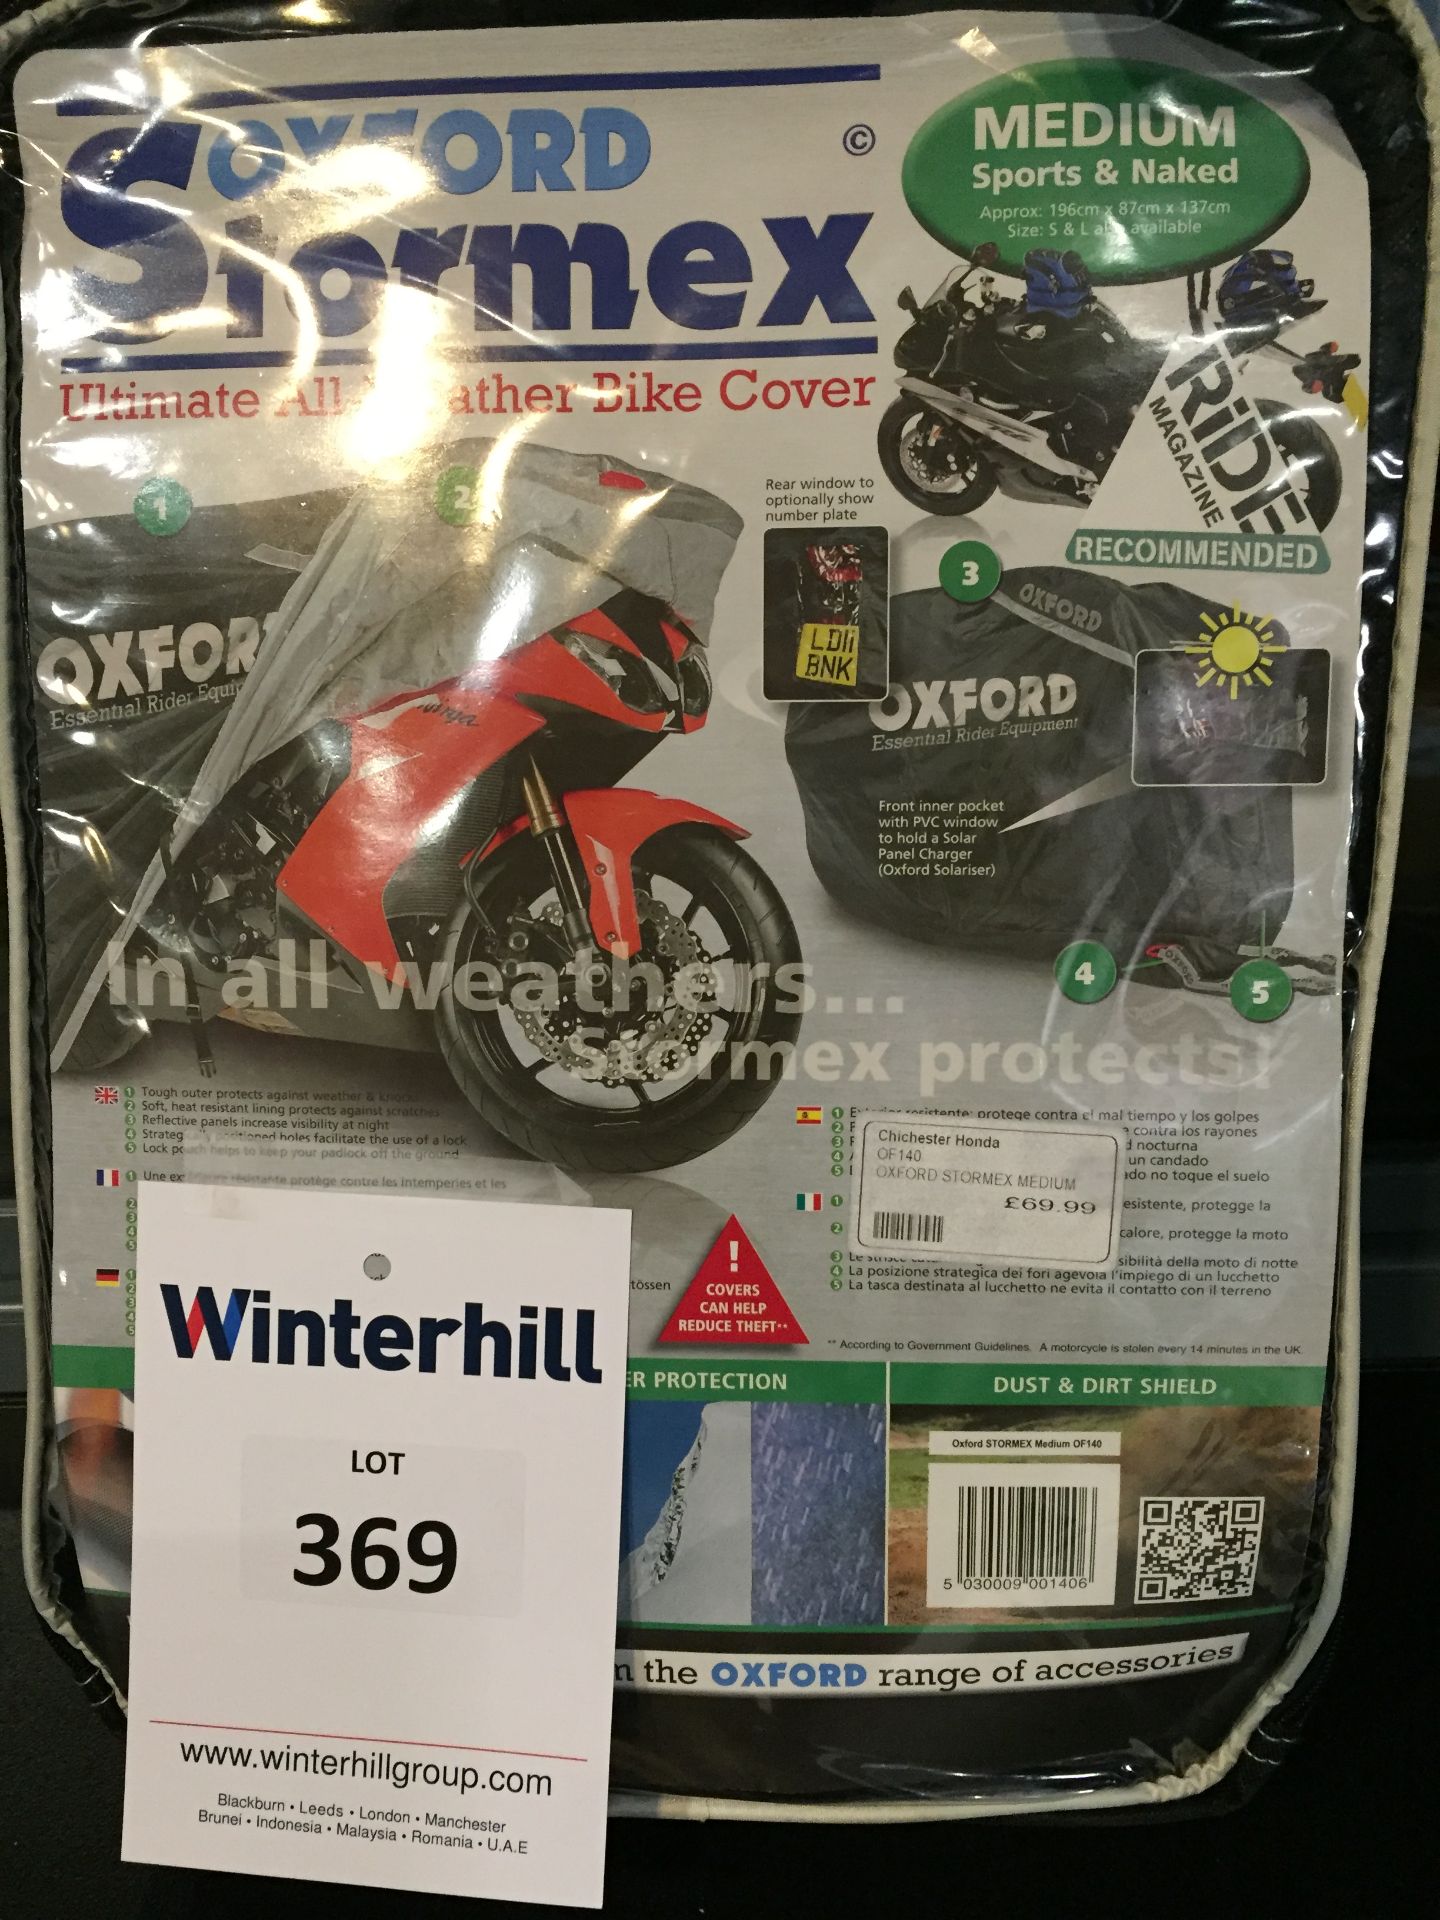 Oxford Stormex Ultimate All-weather Bike Cover